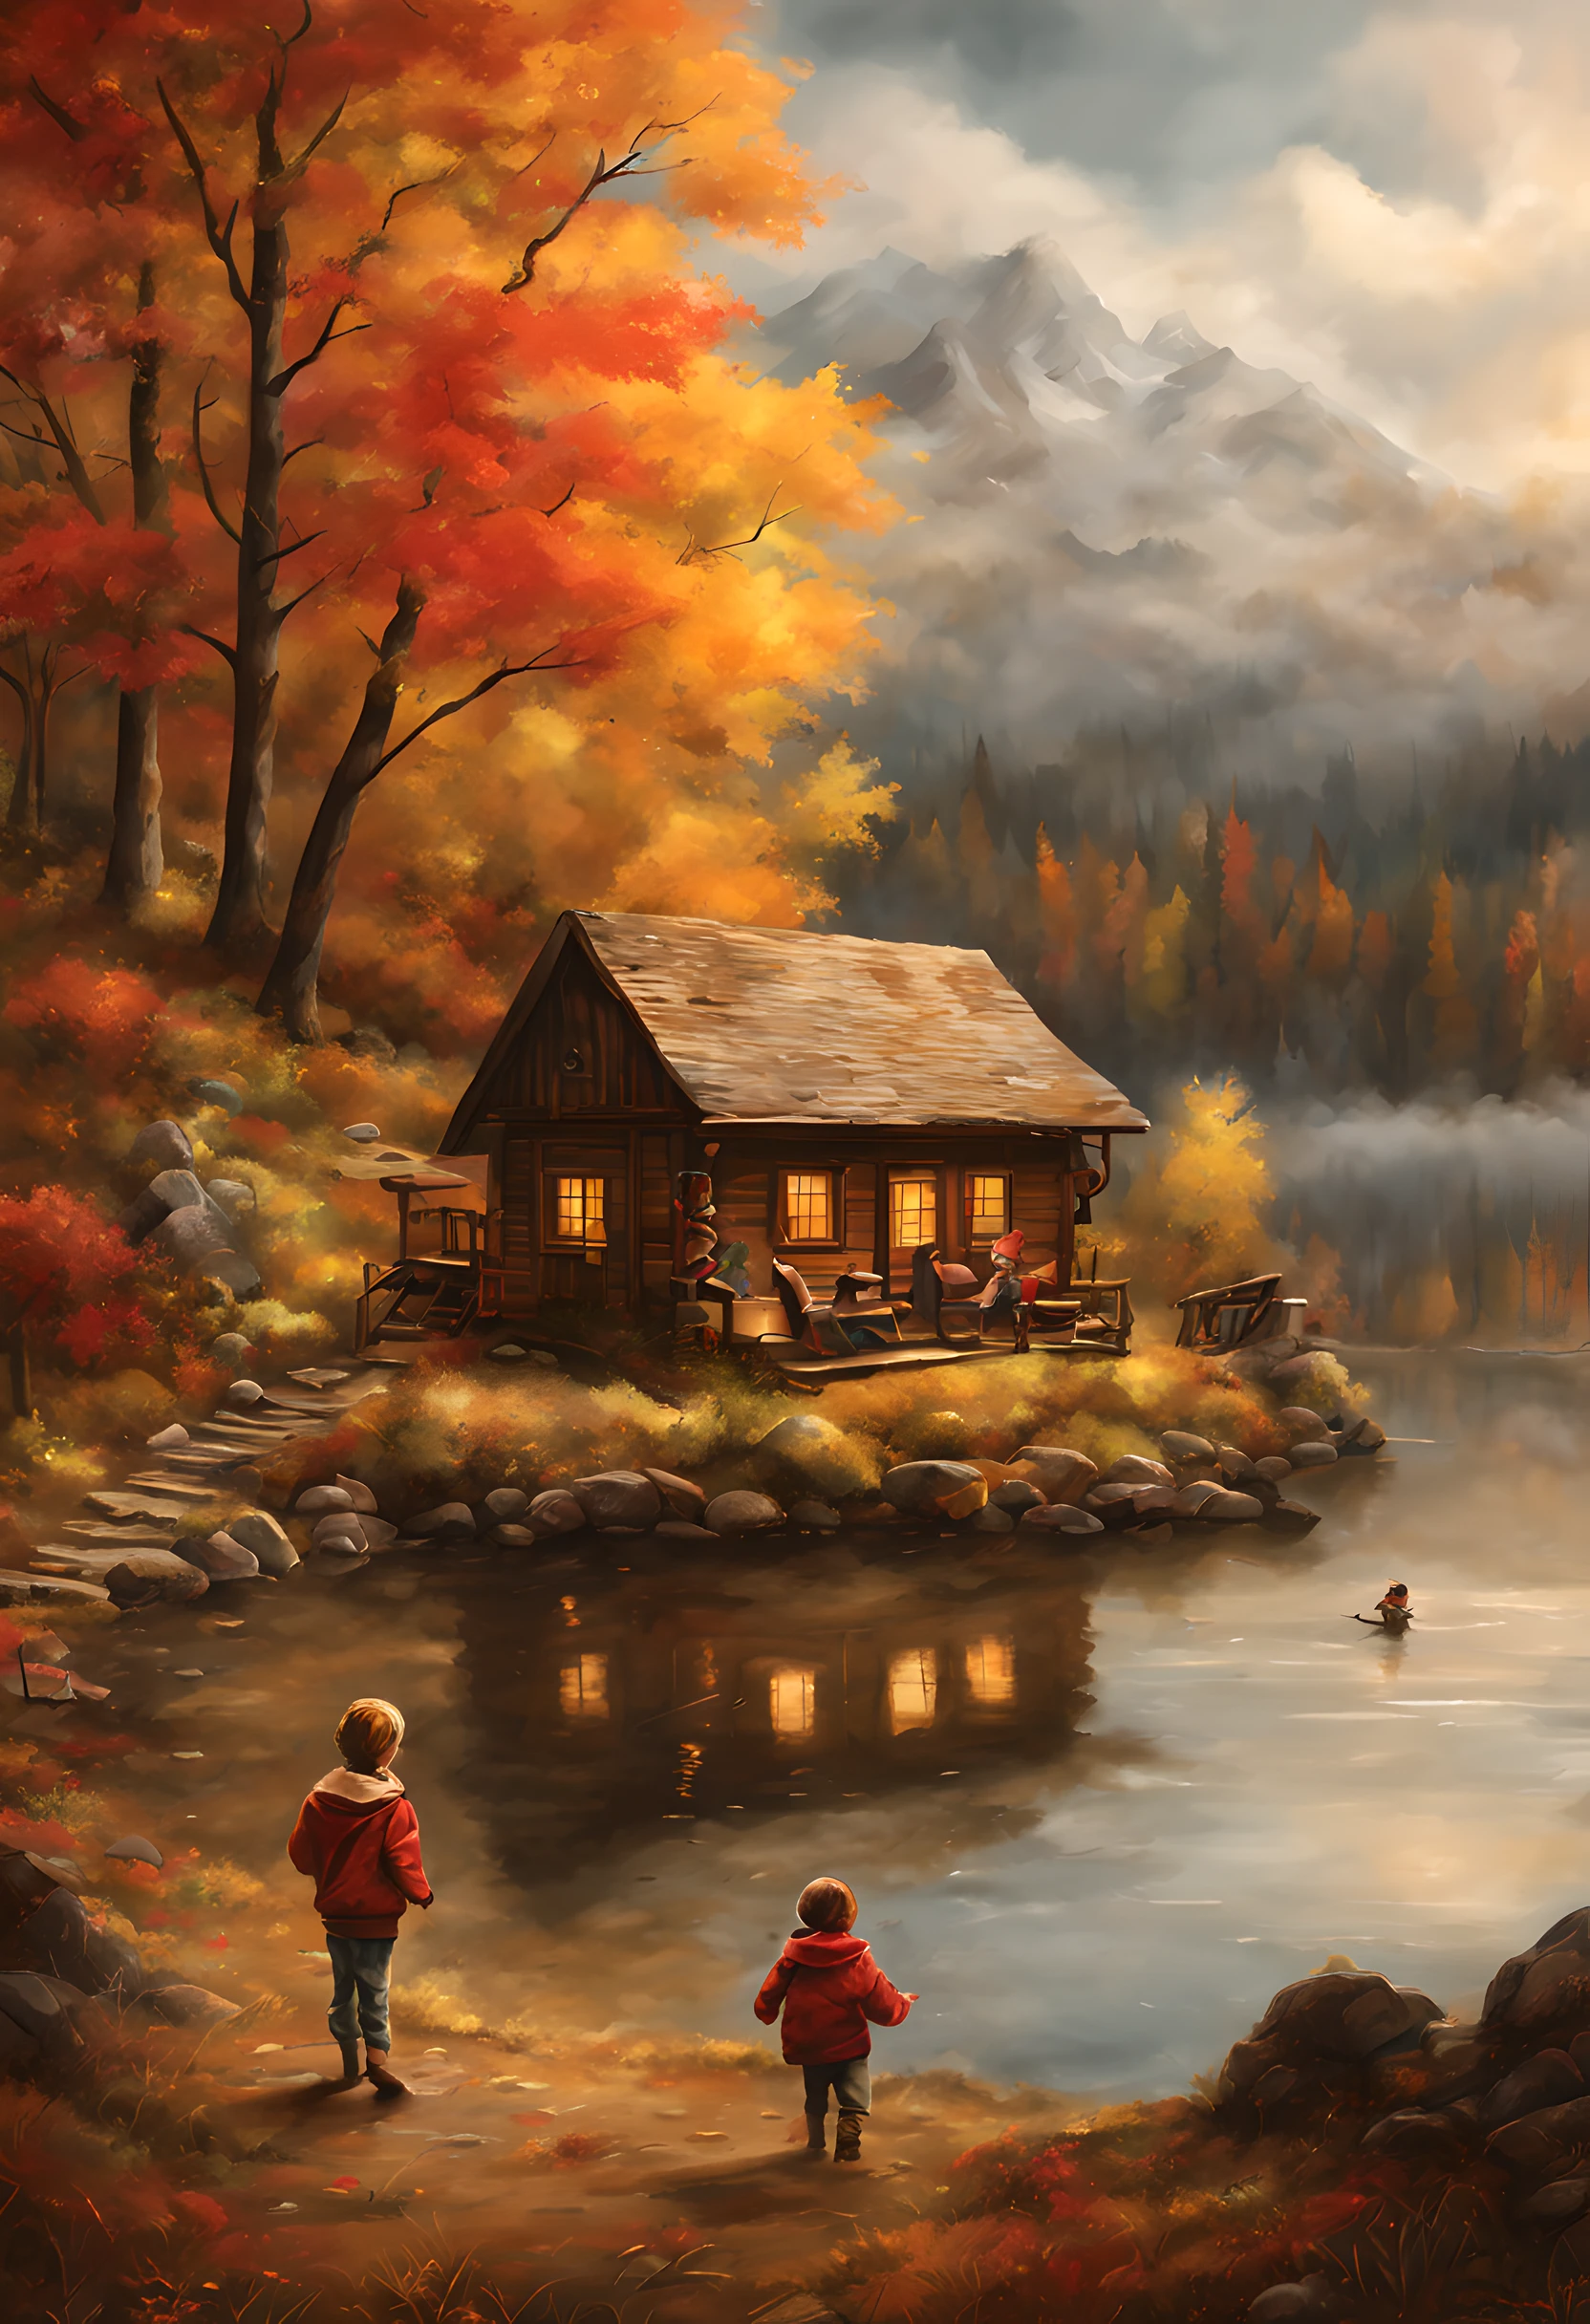 a masterpiece art depicted many kids playing in front of a cute  cabin in the middle of a dark gloomy lake, in the Mountain, in autumn day